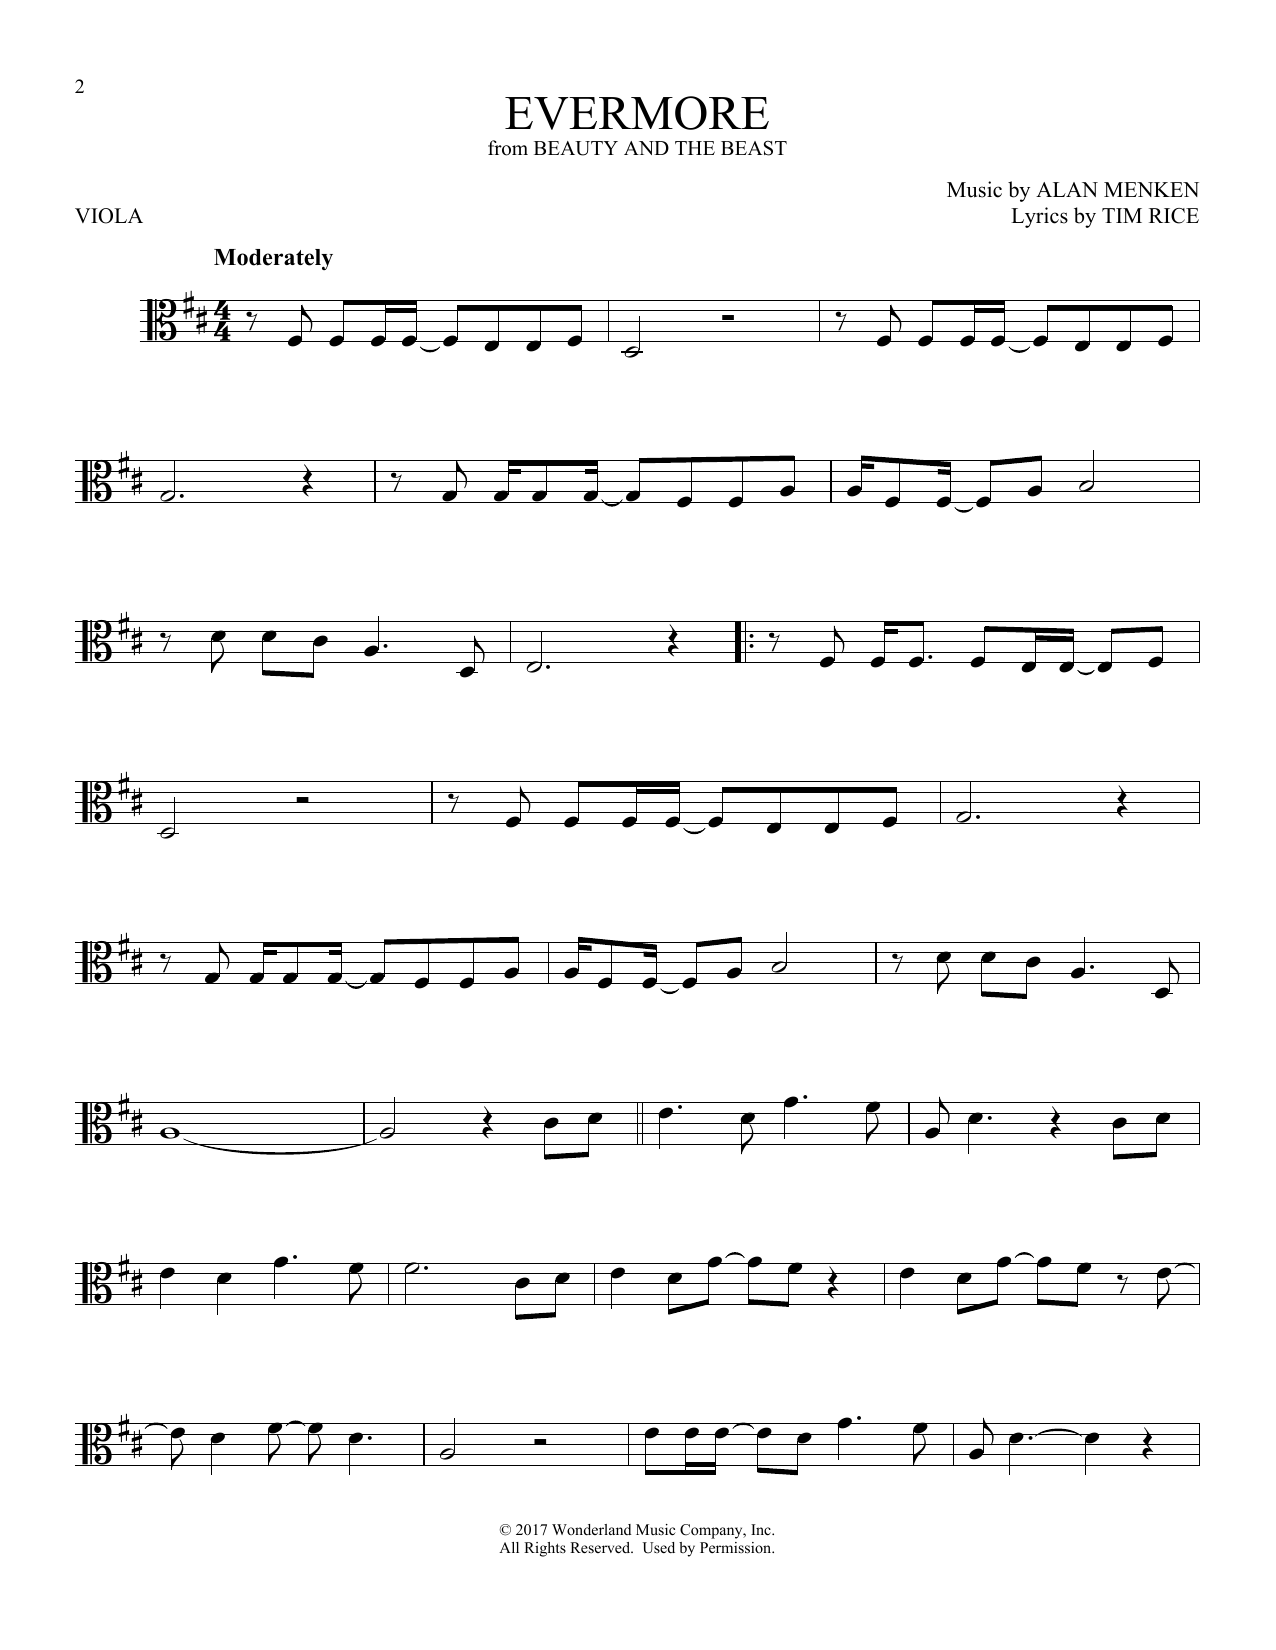 Download Tim Rice Evermore (from Beauty and the Beast) Sheet Music